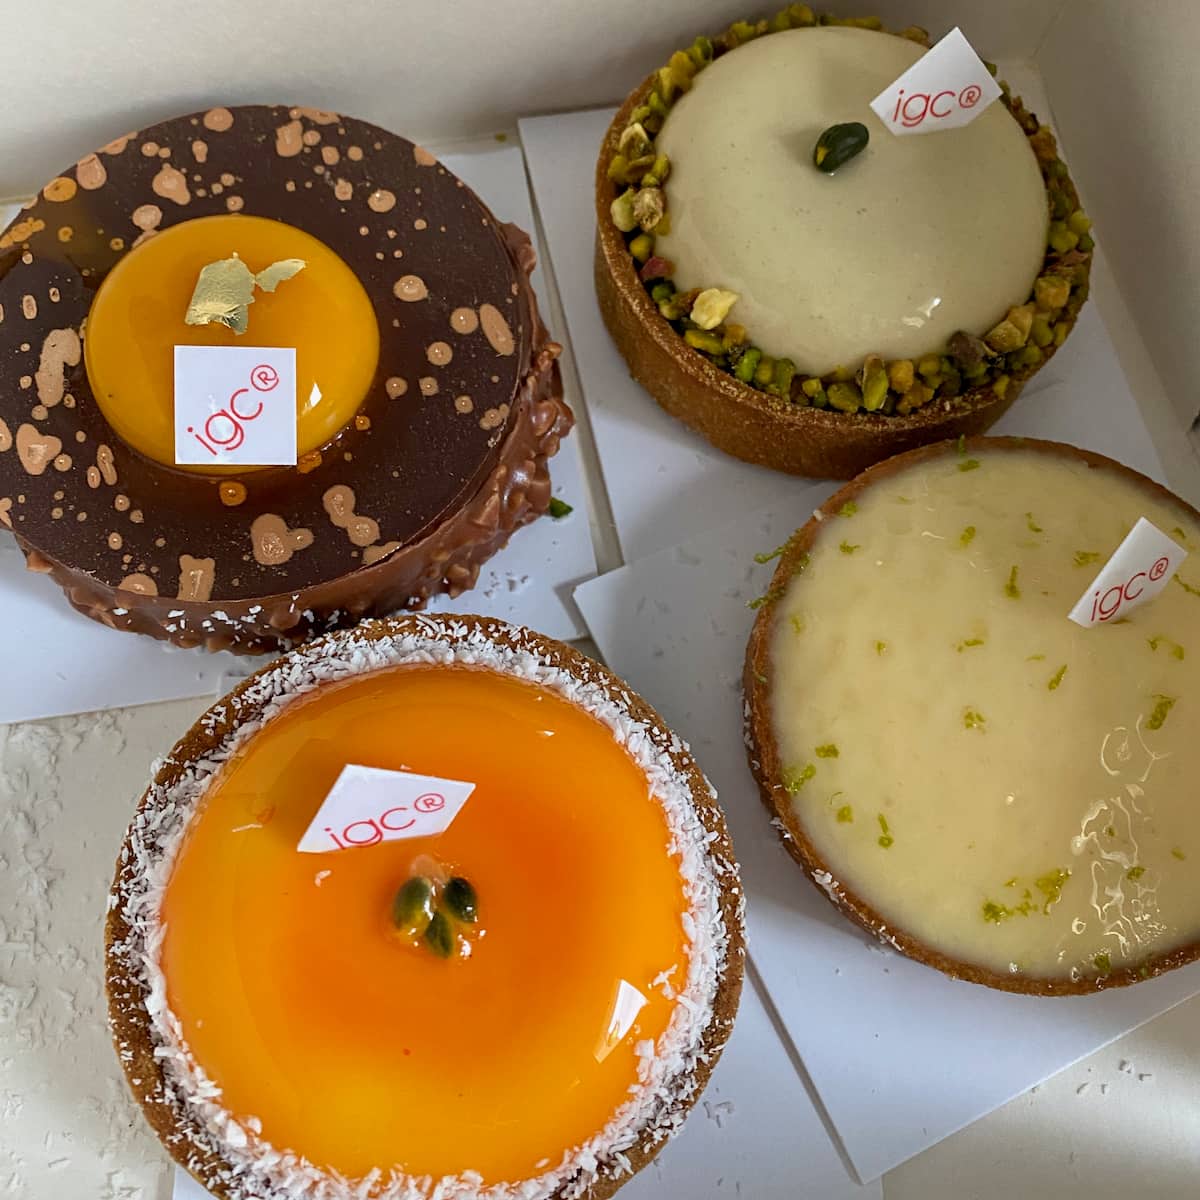 4 tarts in a pastry box